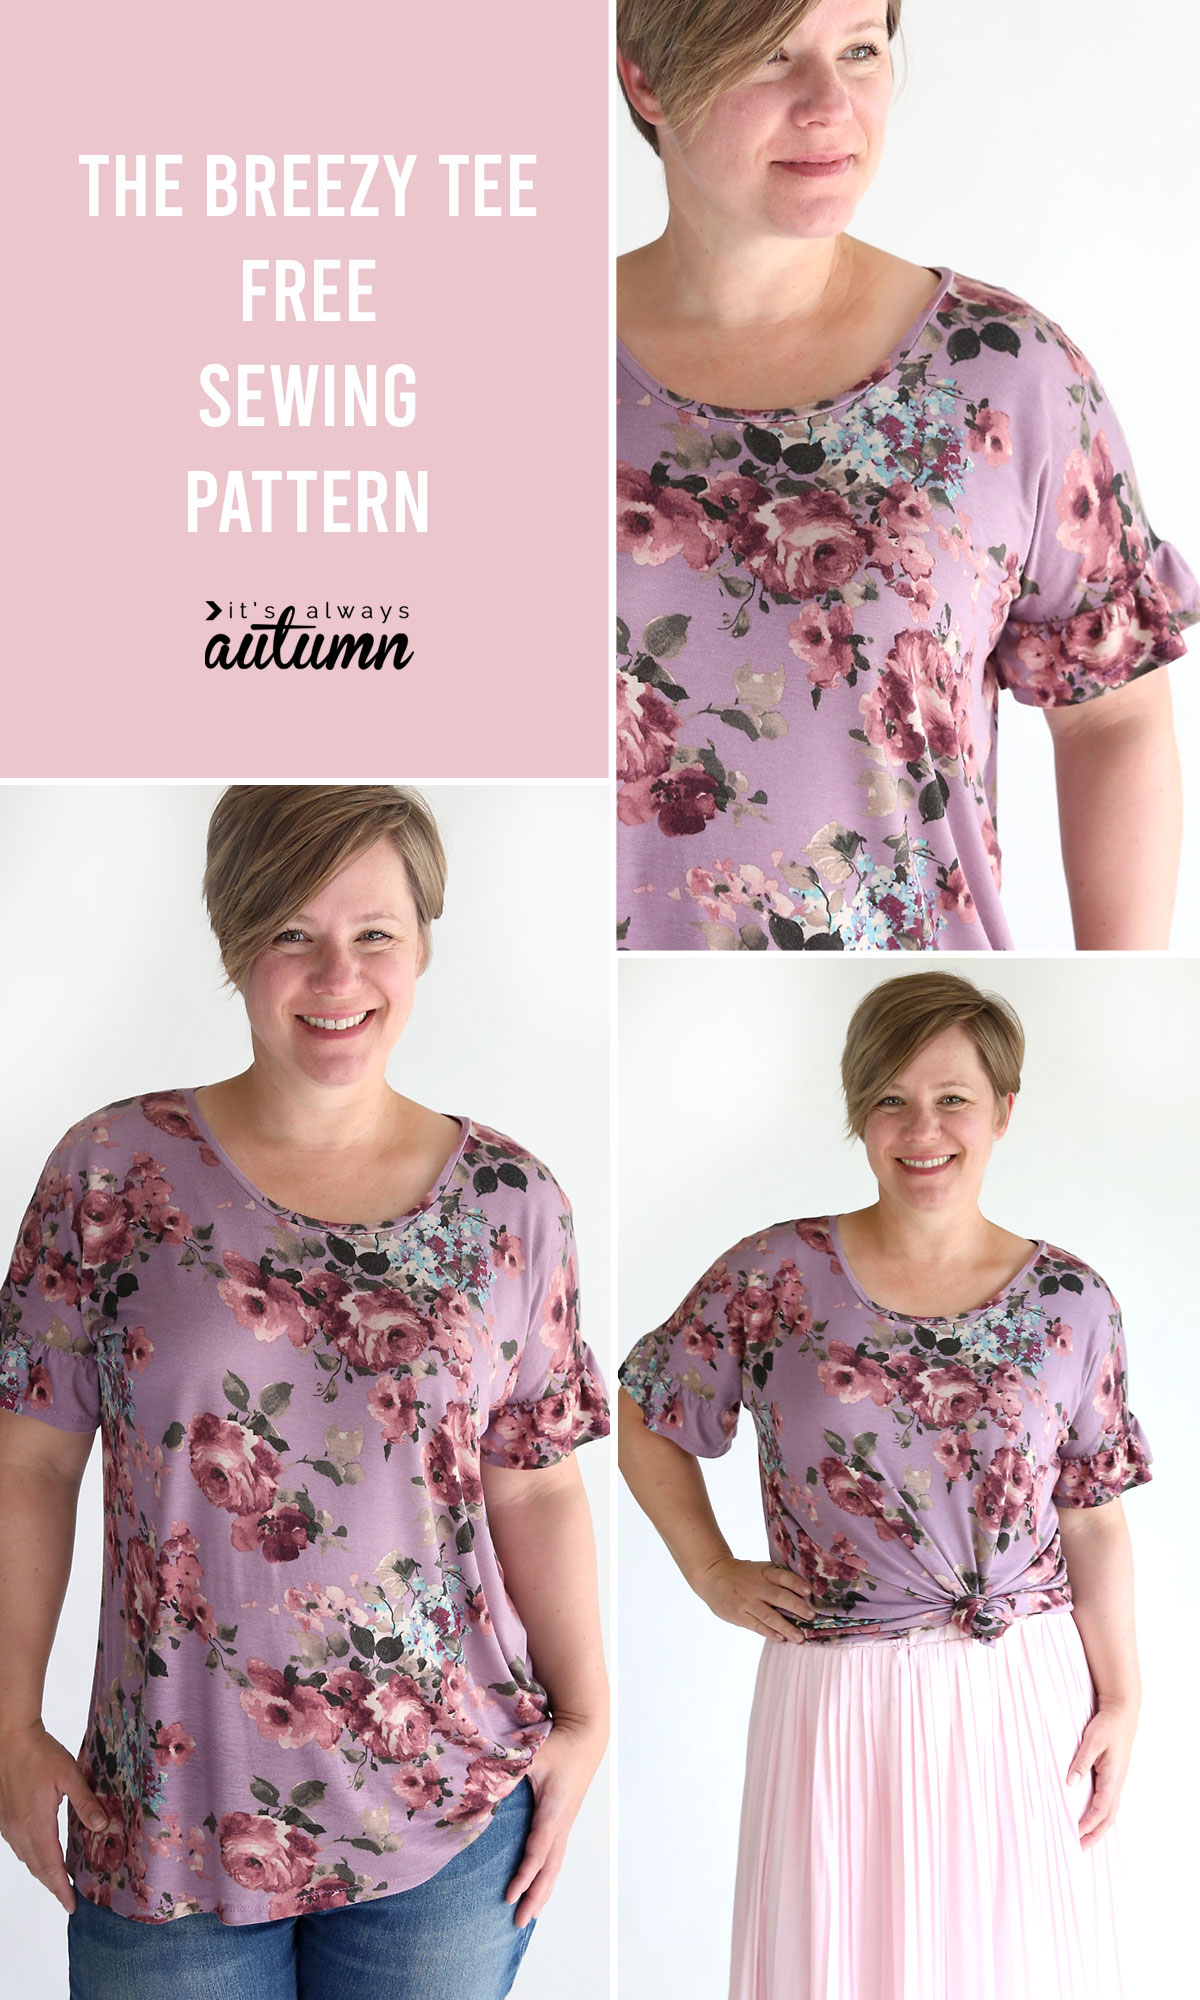 The breezy tee sewing pattern + flutter sleeves